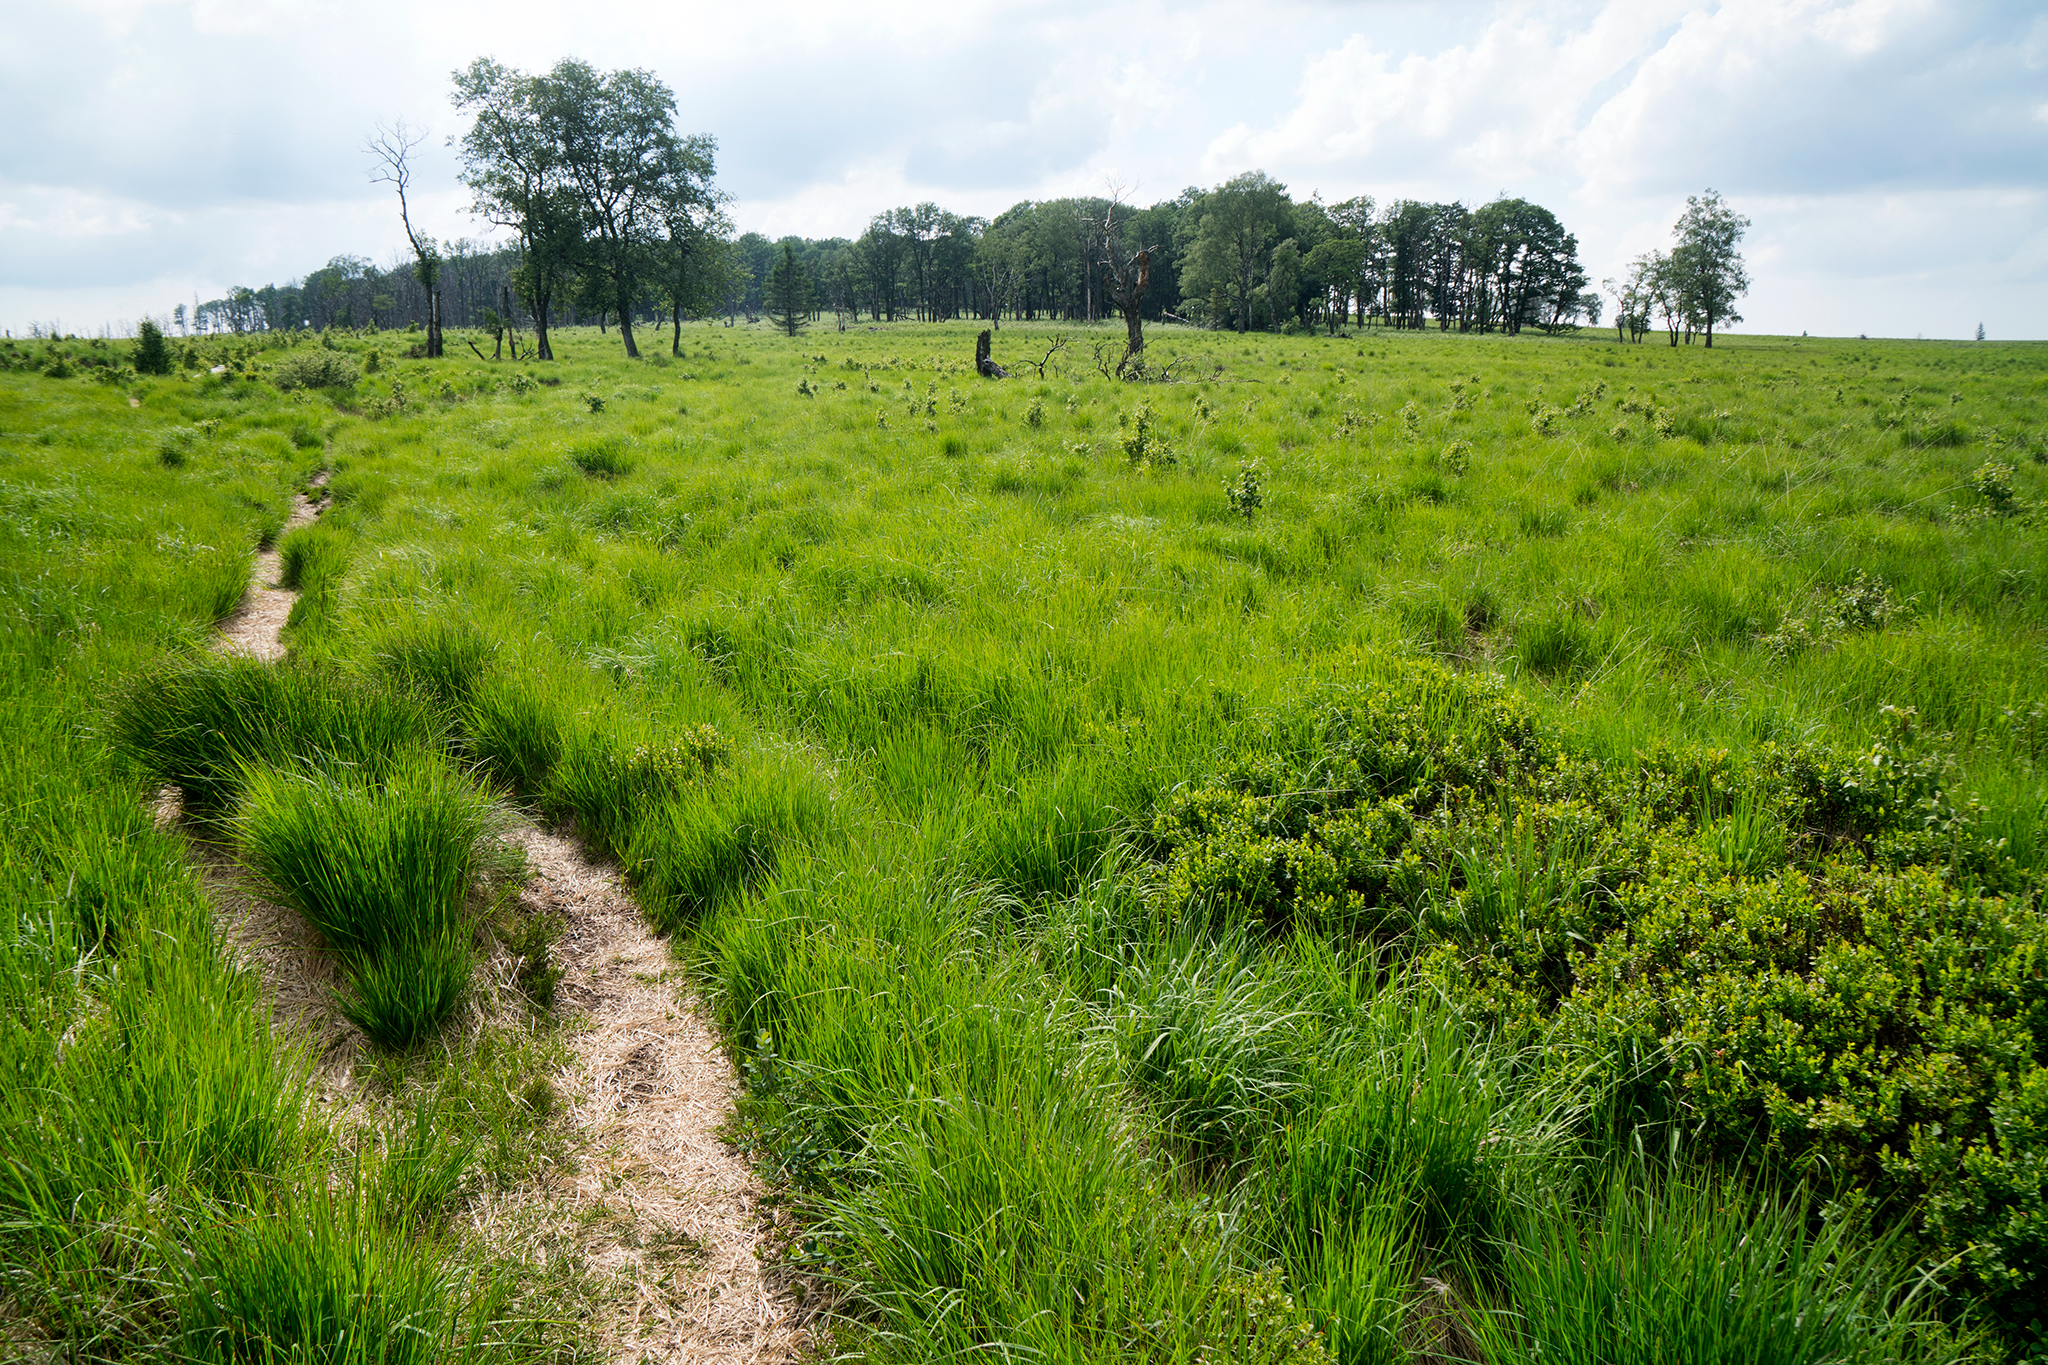  My research showed several trails leading across the open lands of the Hautes Fagnes. I choose one that follows a creekbed and soon find myself shin-deep in mud with the bike on my back… true “bikepacking”. I opt to backtrack to a wooded area where 